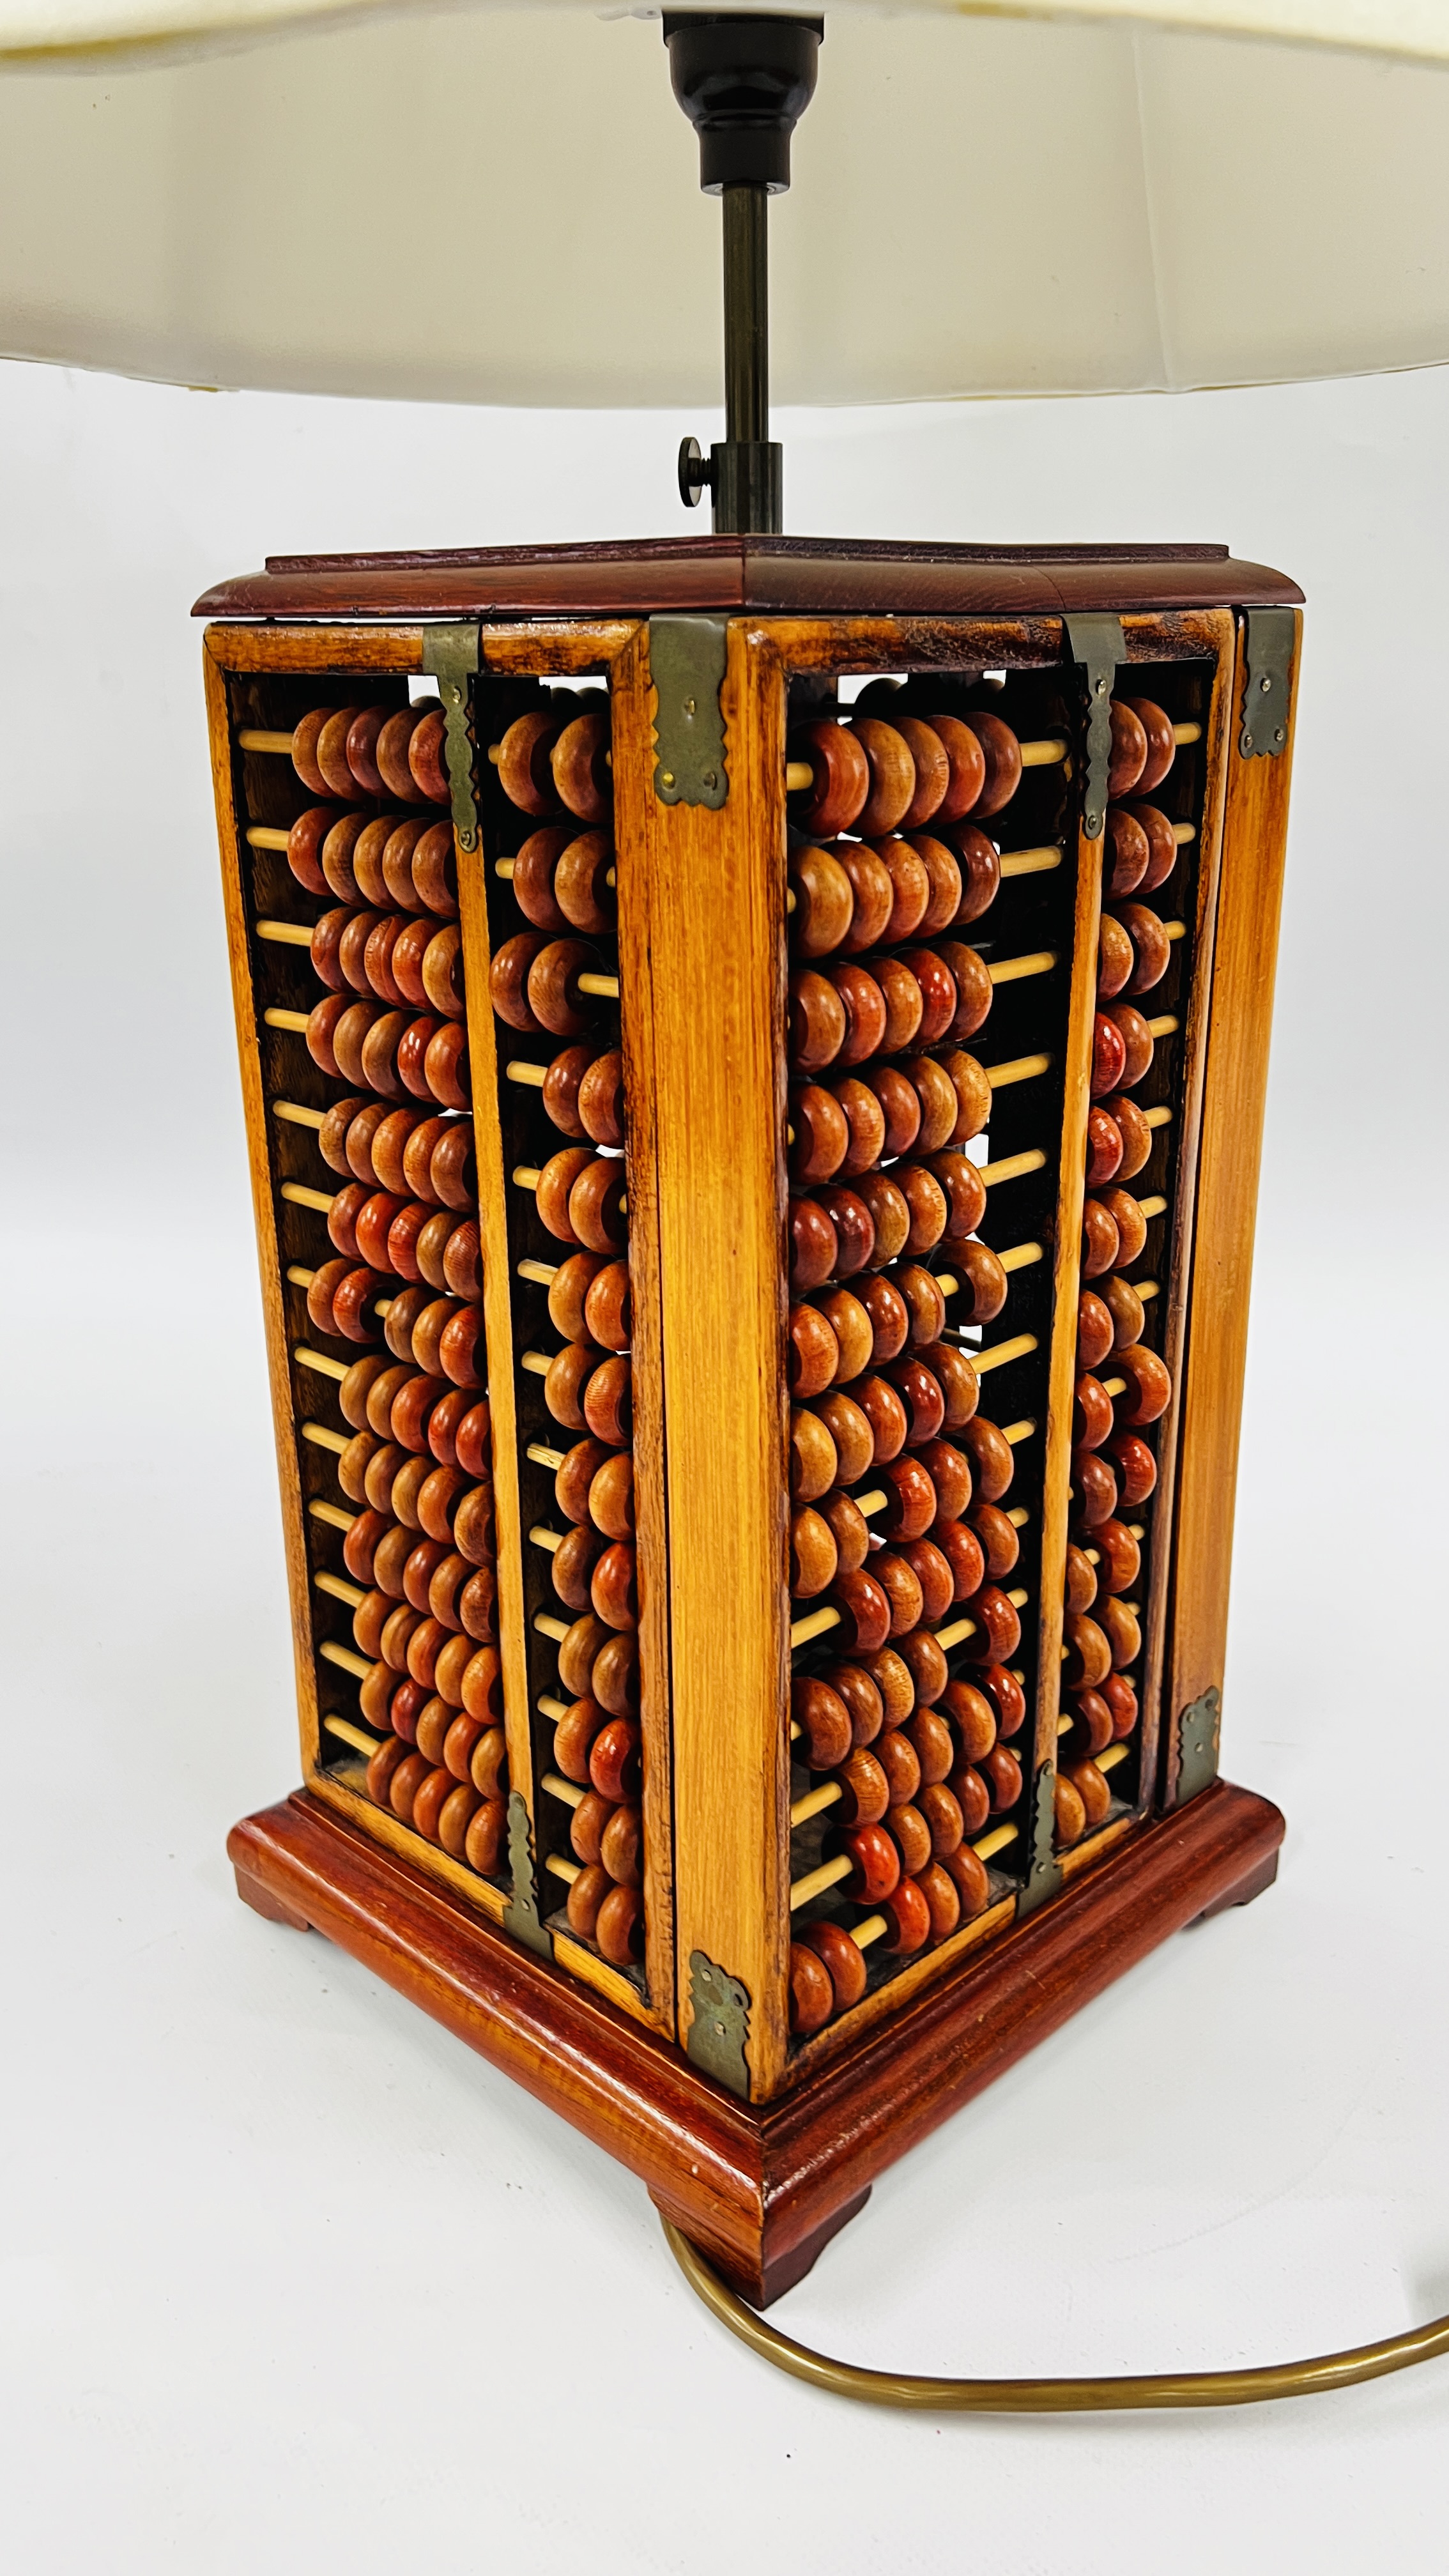 A NOVELTY CONVERTED LAMP FROM 4 ABACUS BOARDS WITH SHADE - WIRE REMOVED - SOLD AS SEEN. - Image 4 of 5